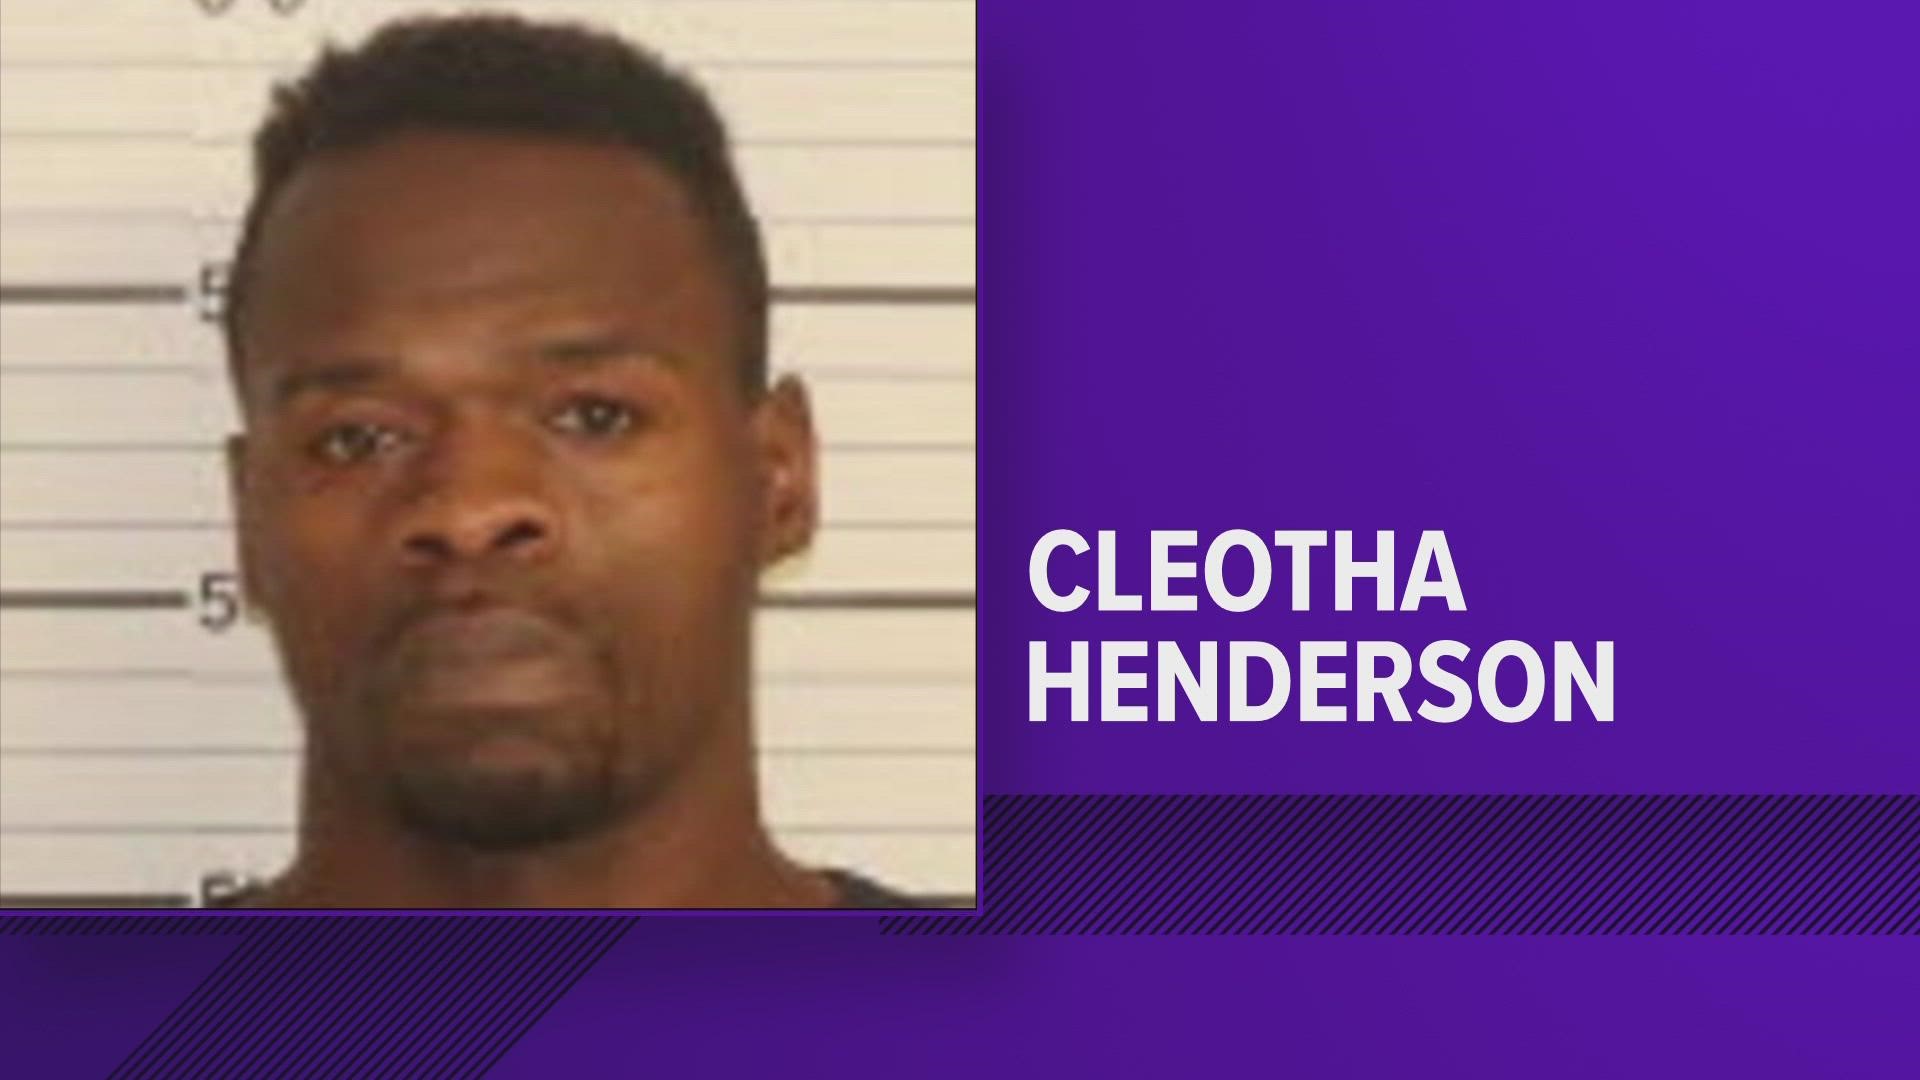 The D.A. said that means the case against Cleotha Henderson will now go back to a grand jury, and if indicted, the case will move to criminal court.